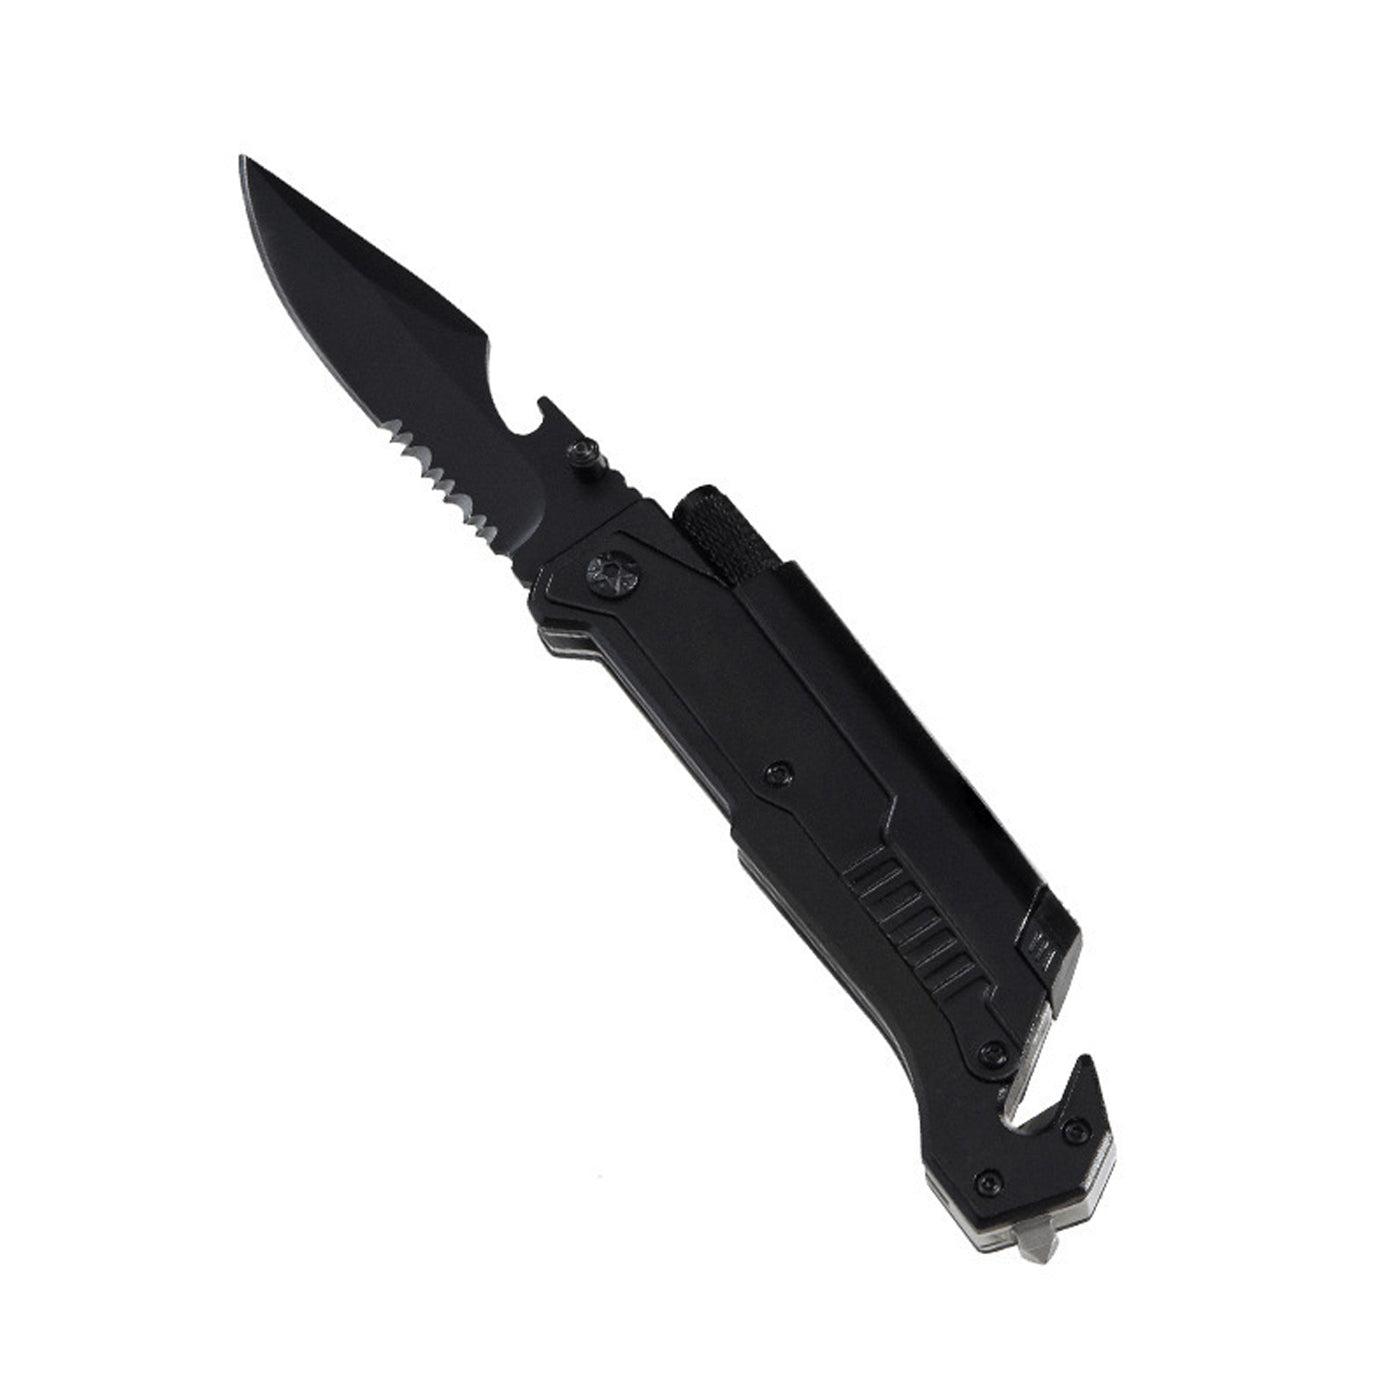 Multitool Folding Knife for EDC Outdoor Camping, Hunting, Emergencies